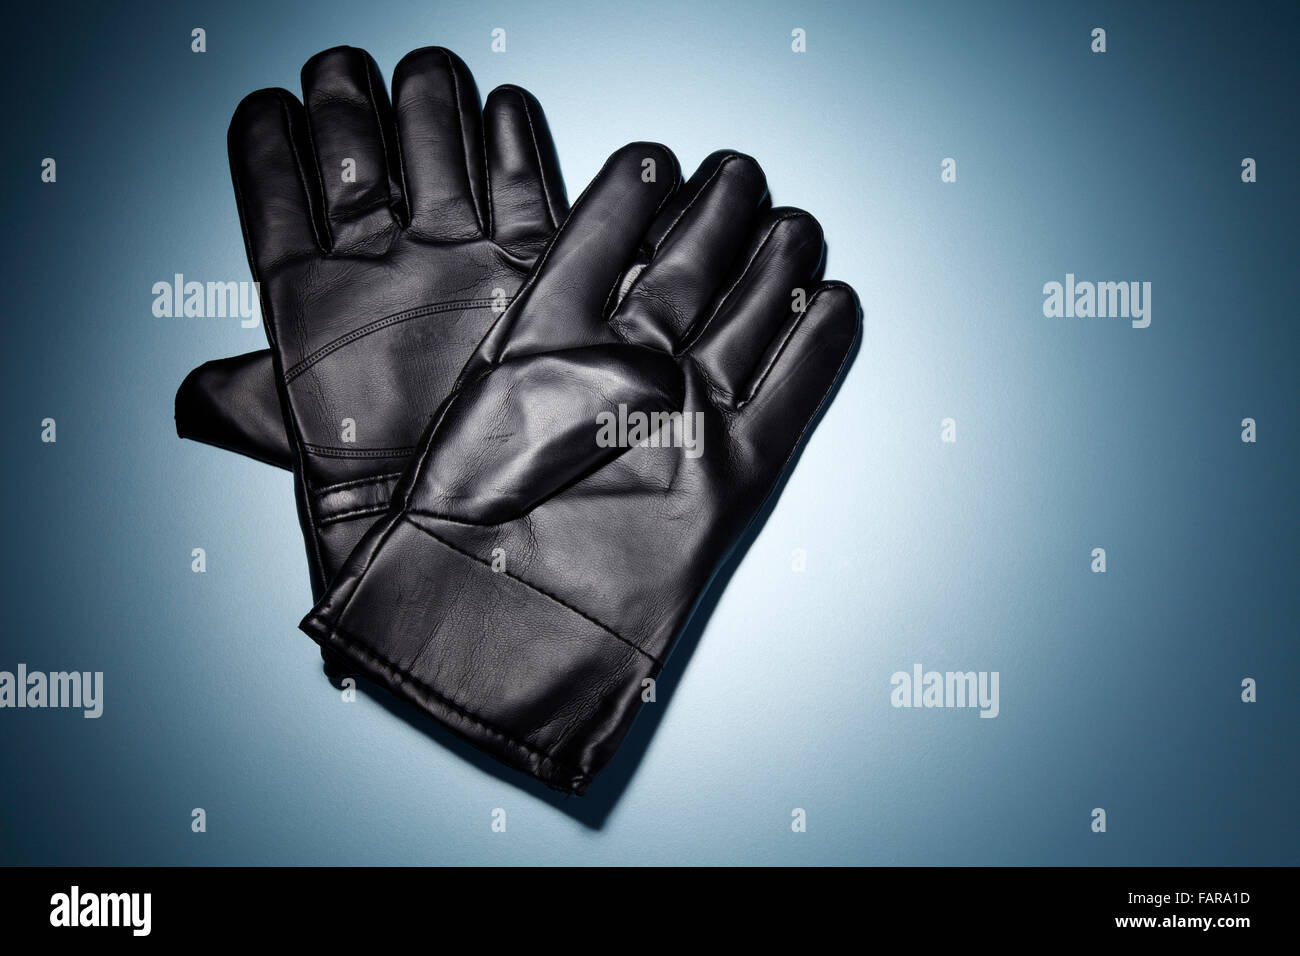 A pair of black gloves isolated on the blue background. Stock Photo